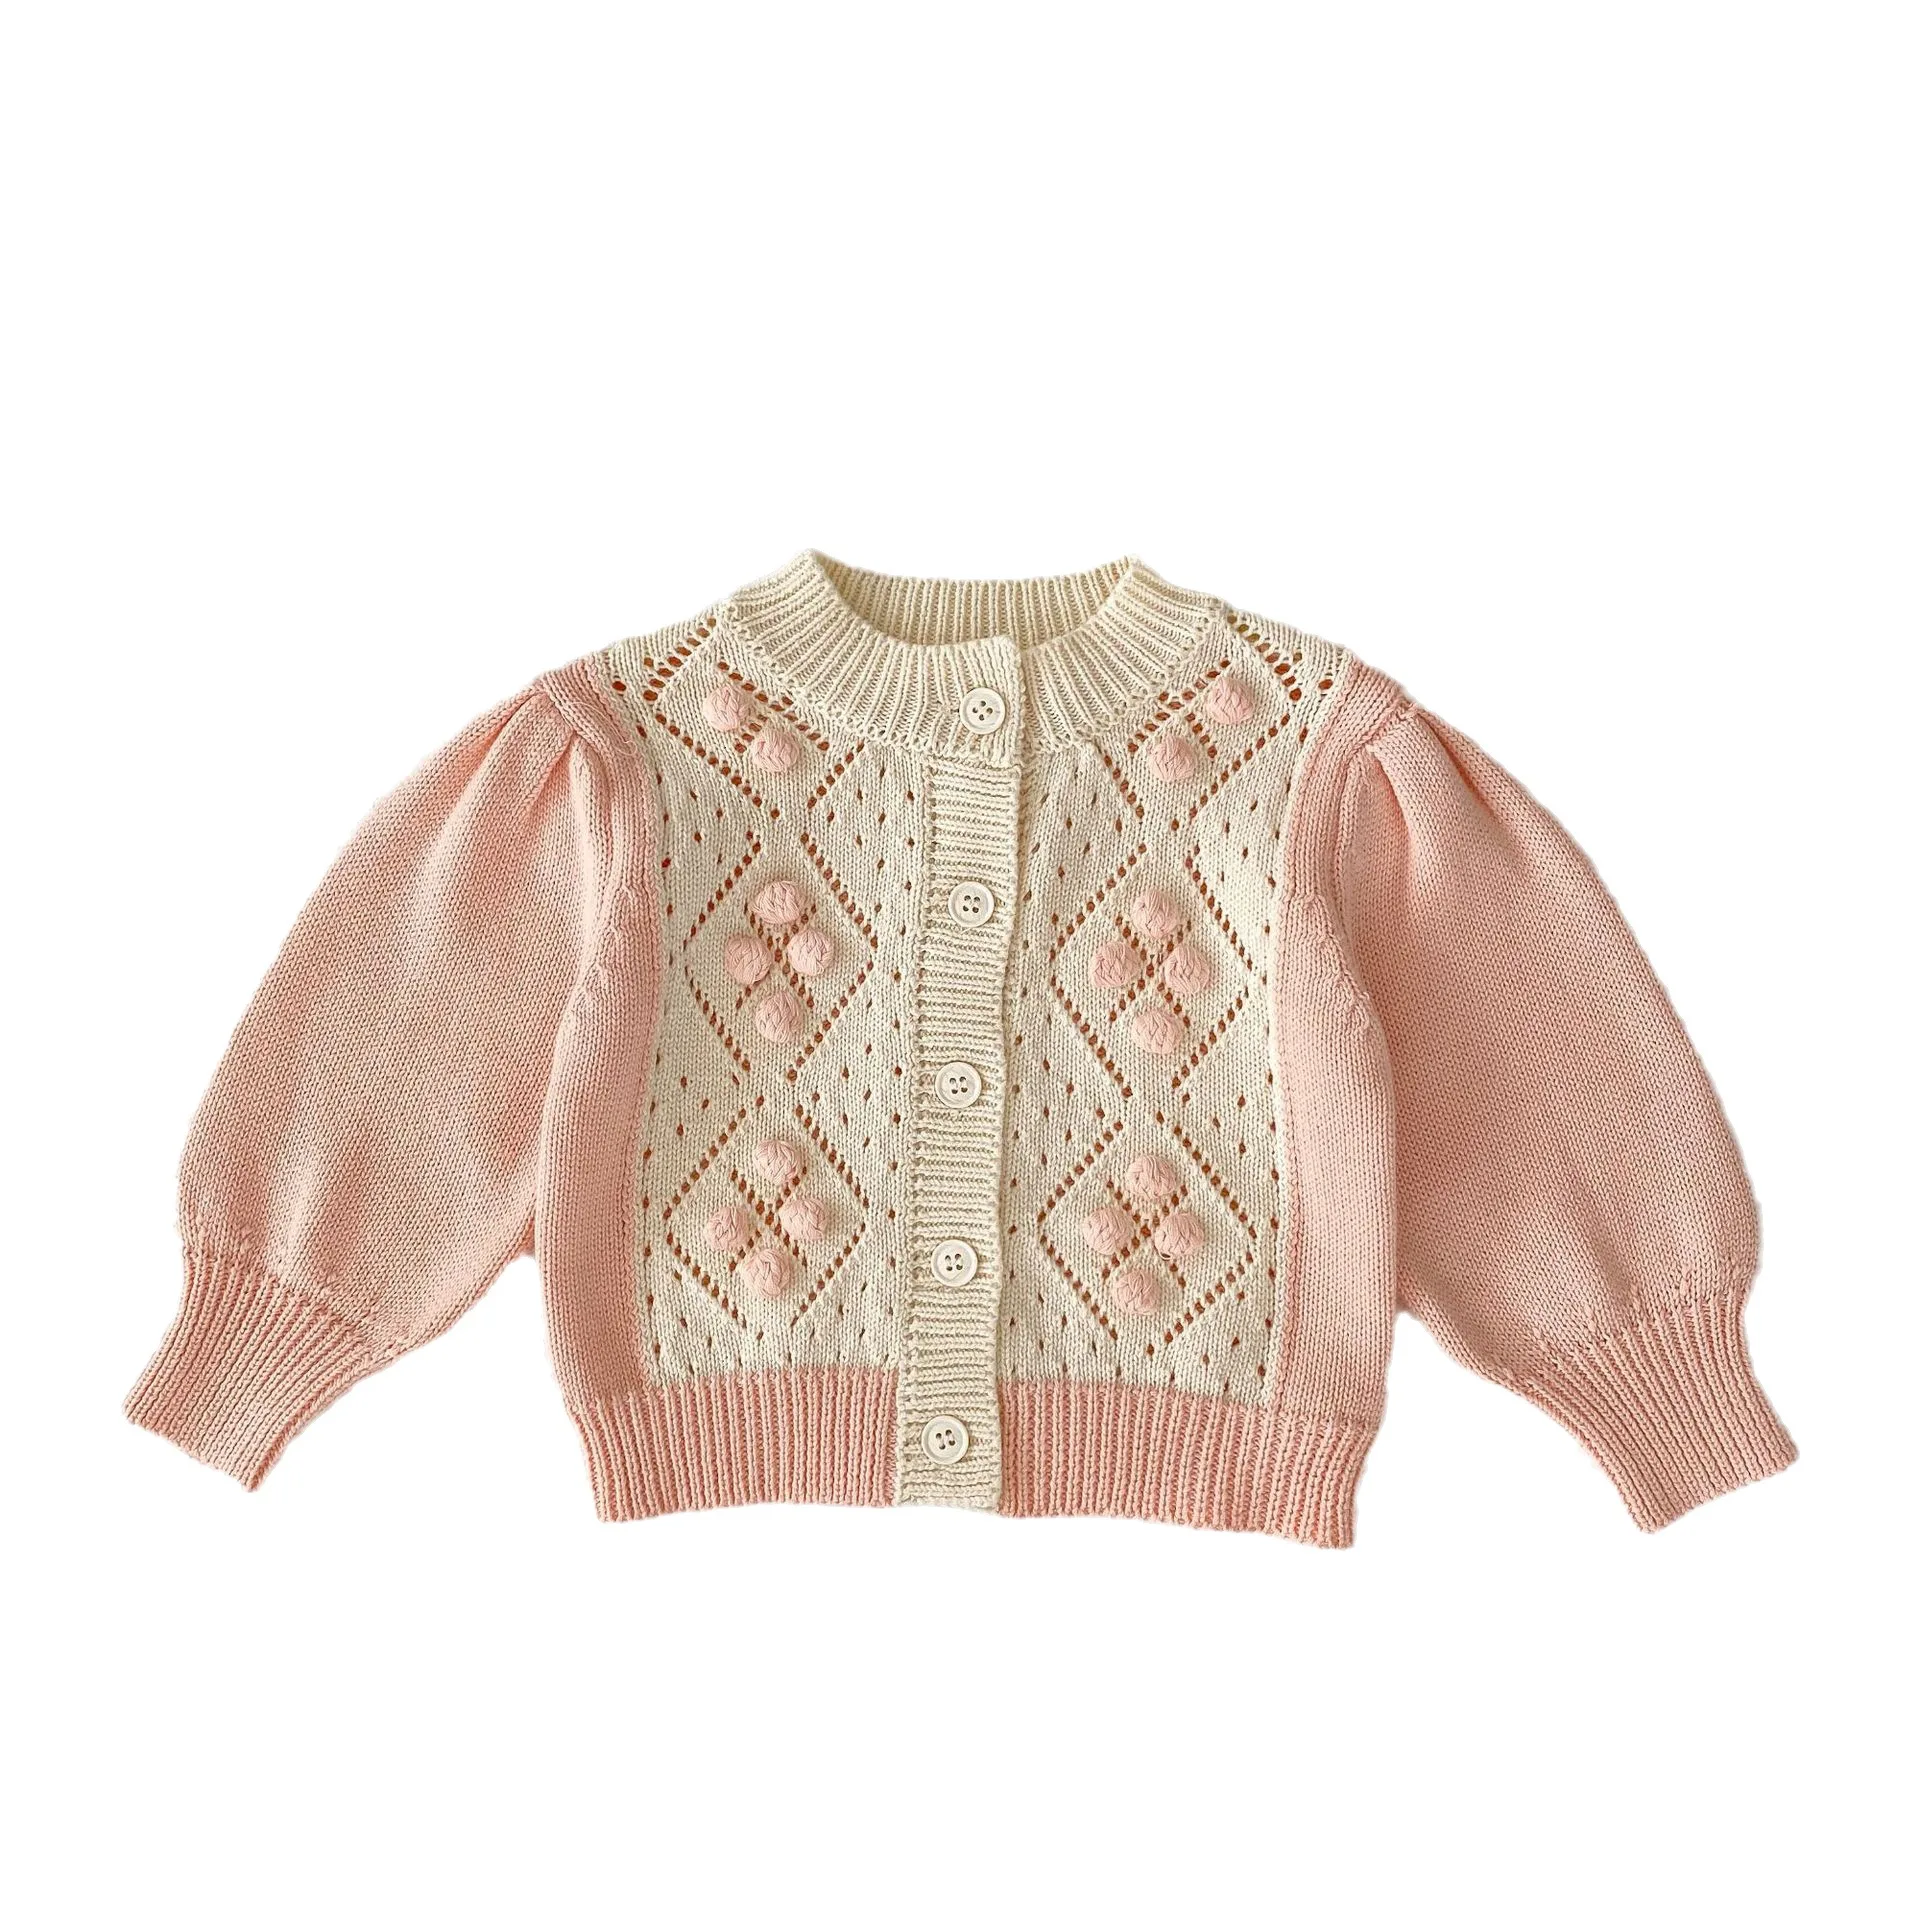 Engepapa Autumn Baby Coat 0-3 Year Old Girls' Bubble Sleeve Knitted Cardigan Round Neck Baby Clothes